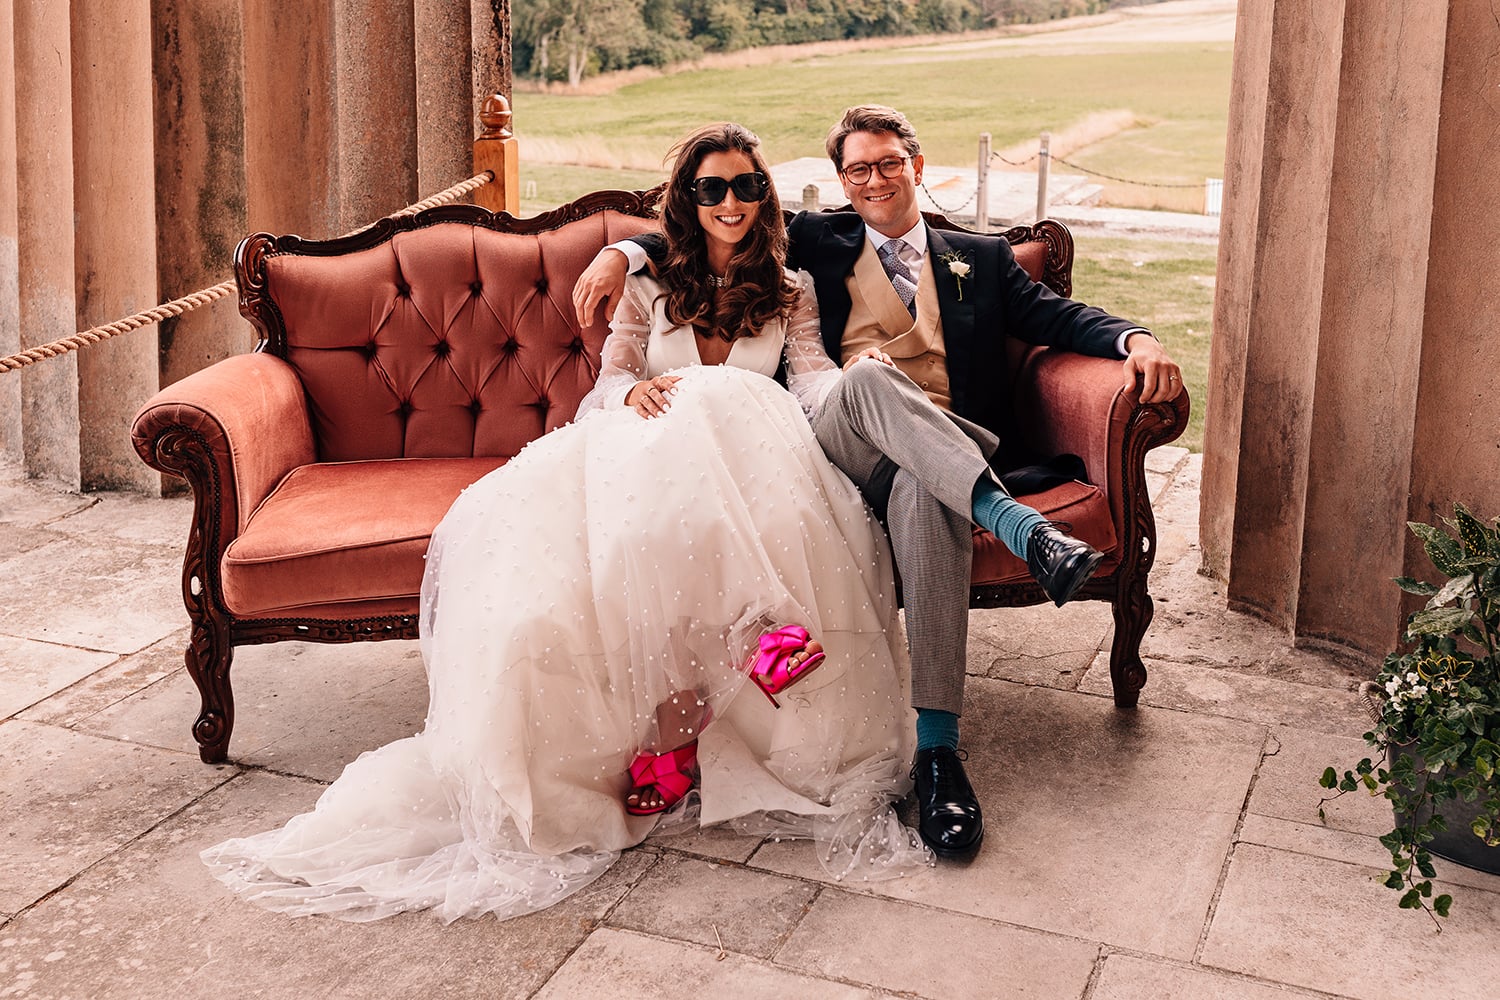 Rock and Roll stylish couple on their wedding day on a vintage chair wearing sunglasses